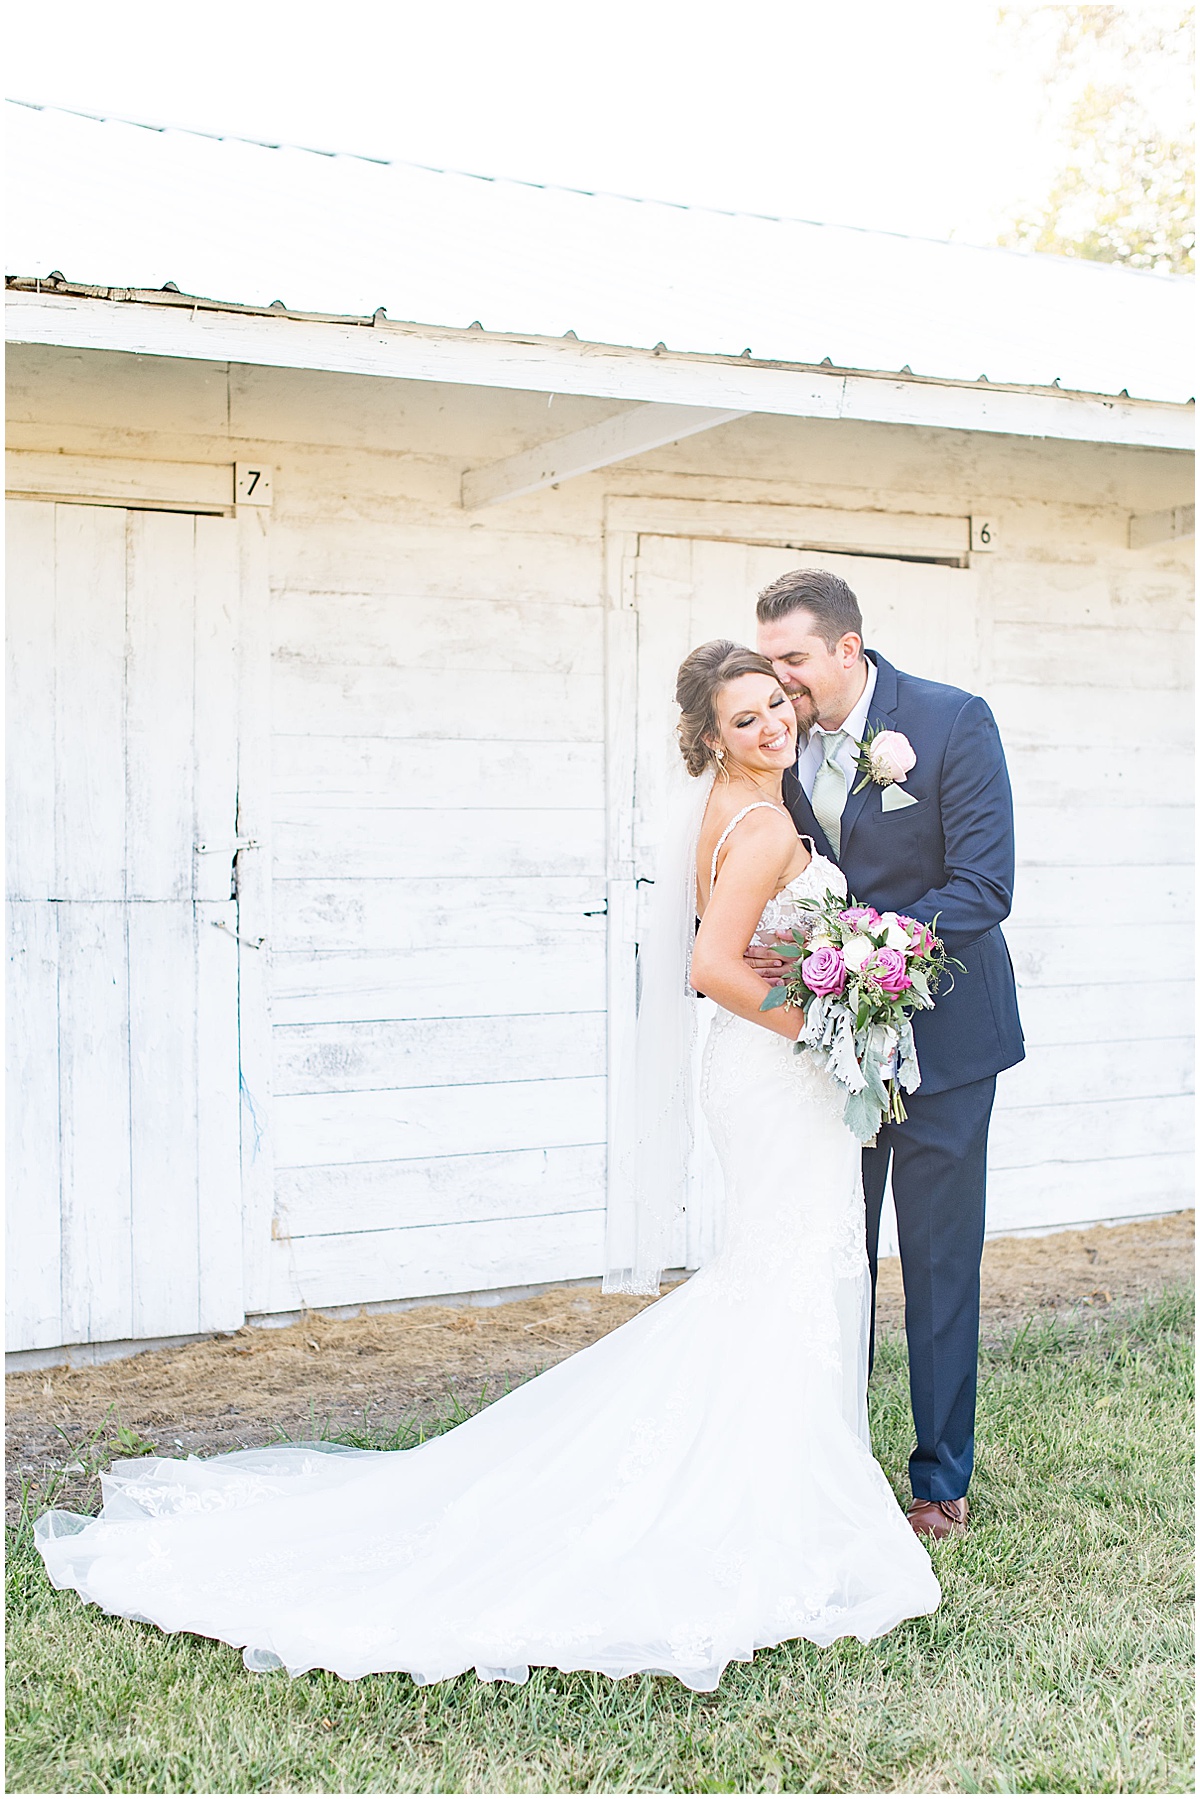 Just married photos after Rensseler, Indiana wedding by Victoria Rayburn Photography